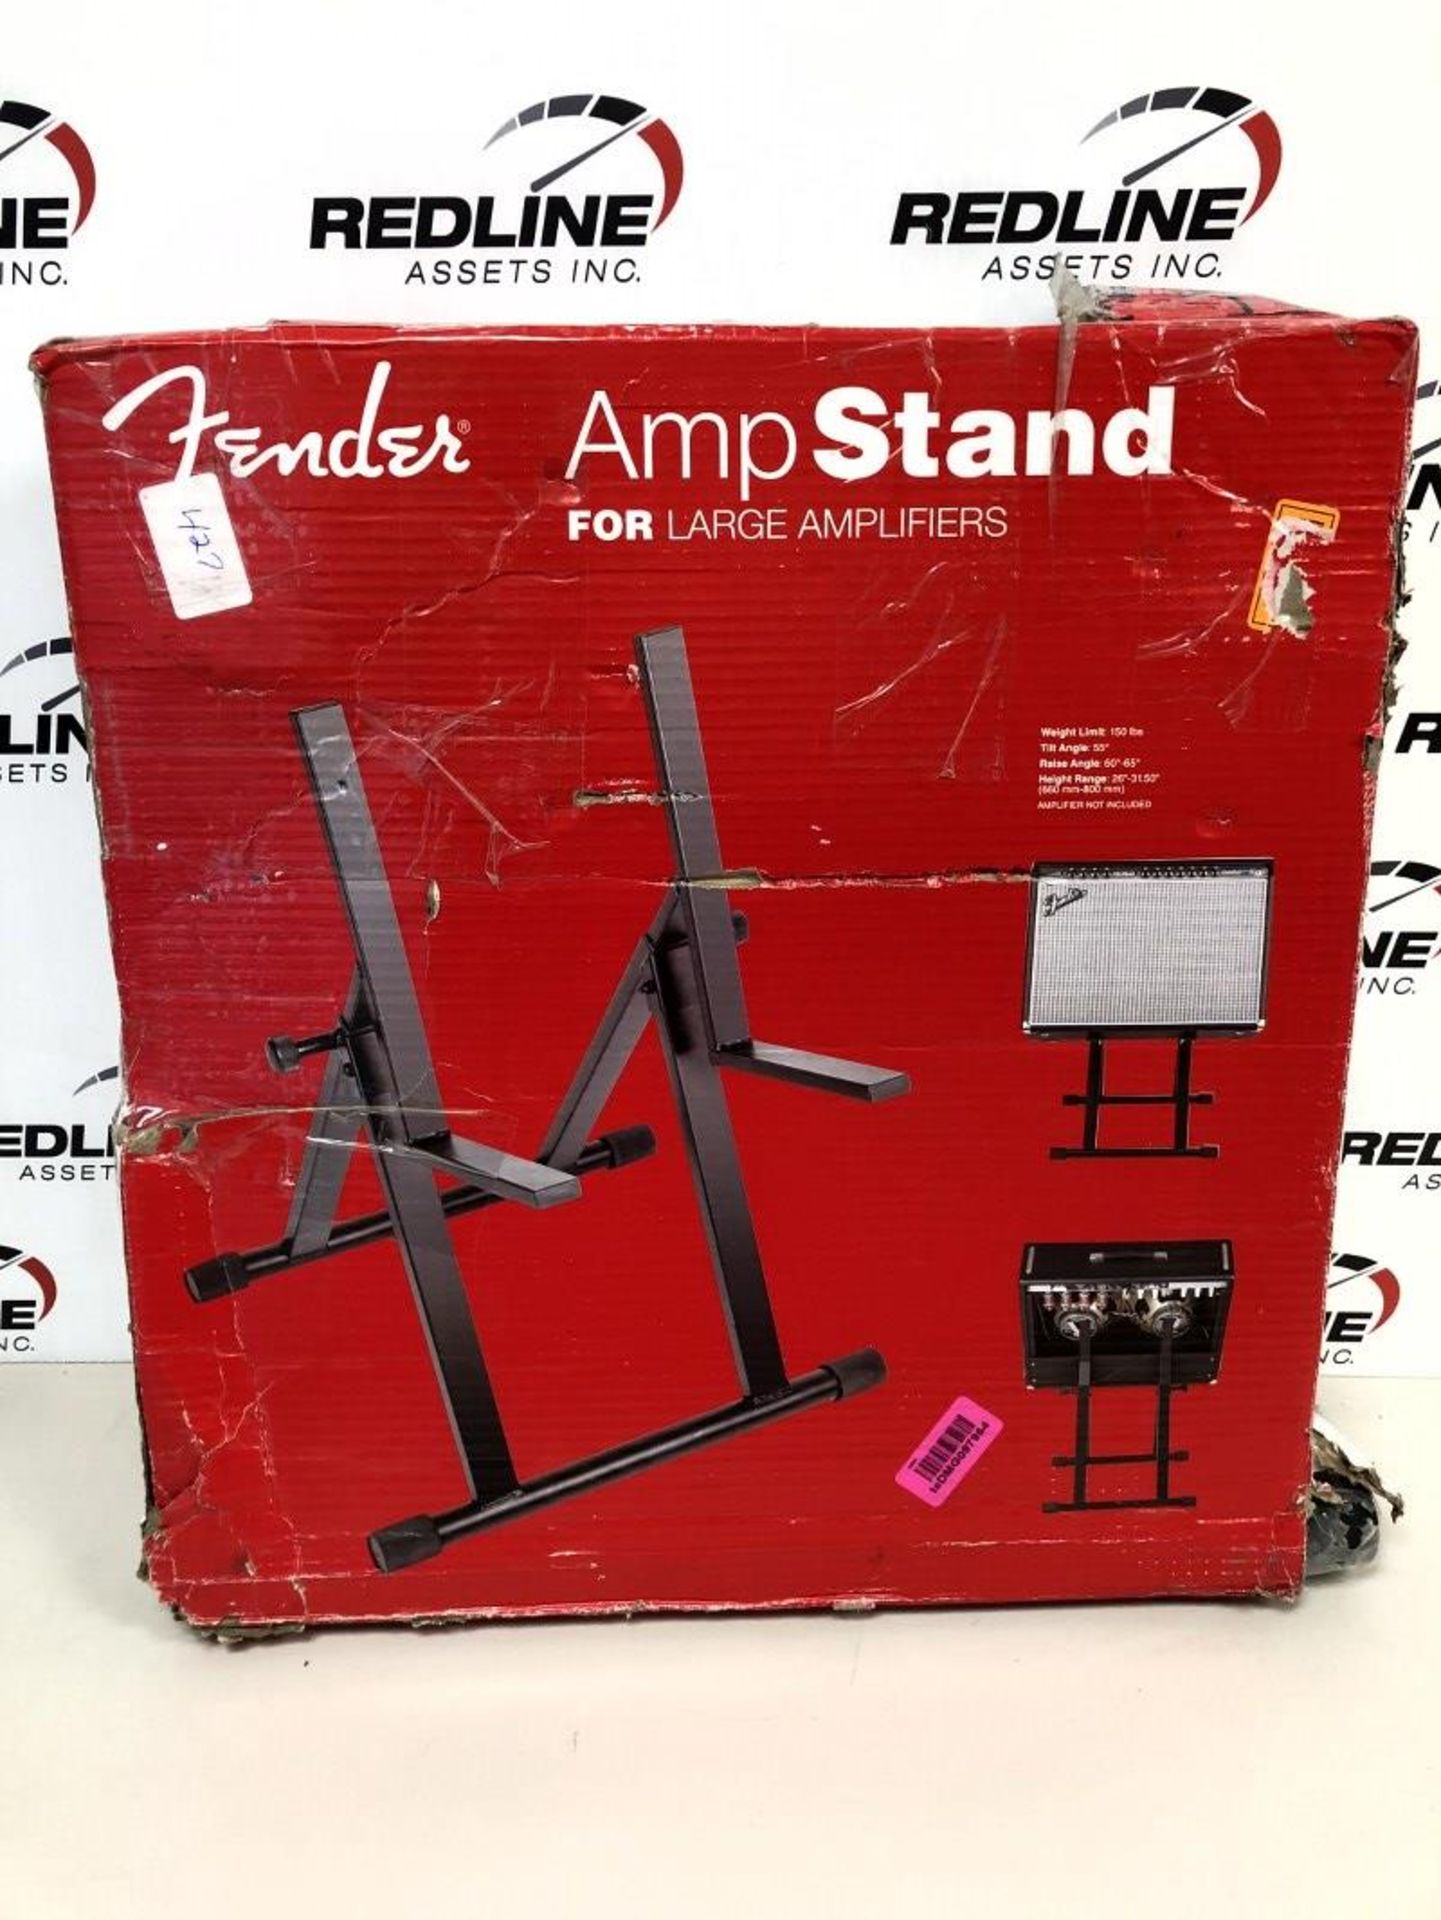 Fender - Amp Stand For Large Amplifiers - Image 2 of 2